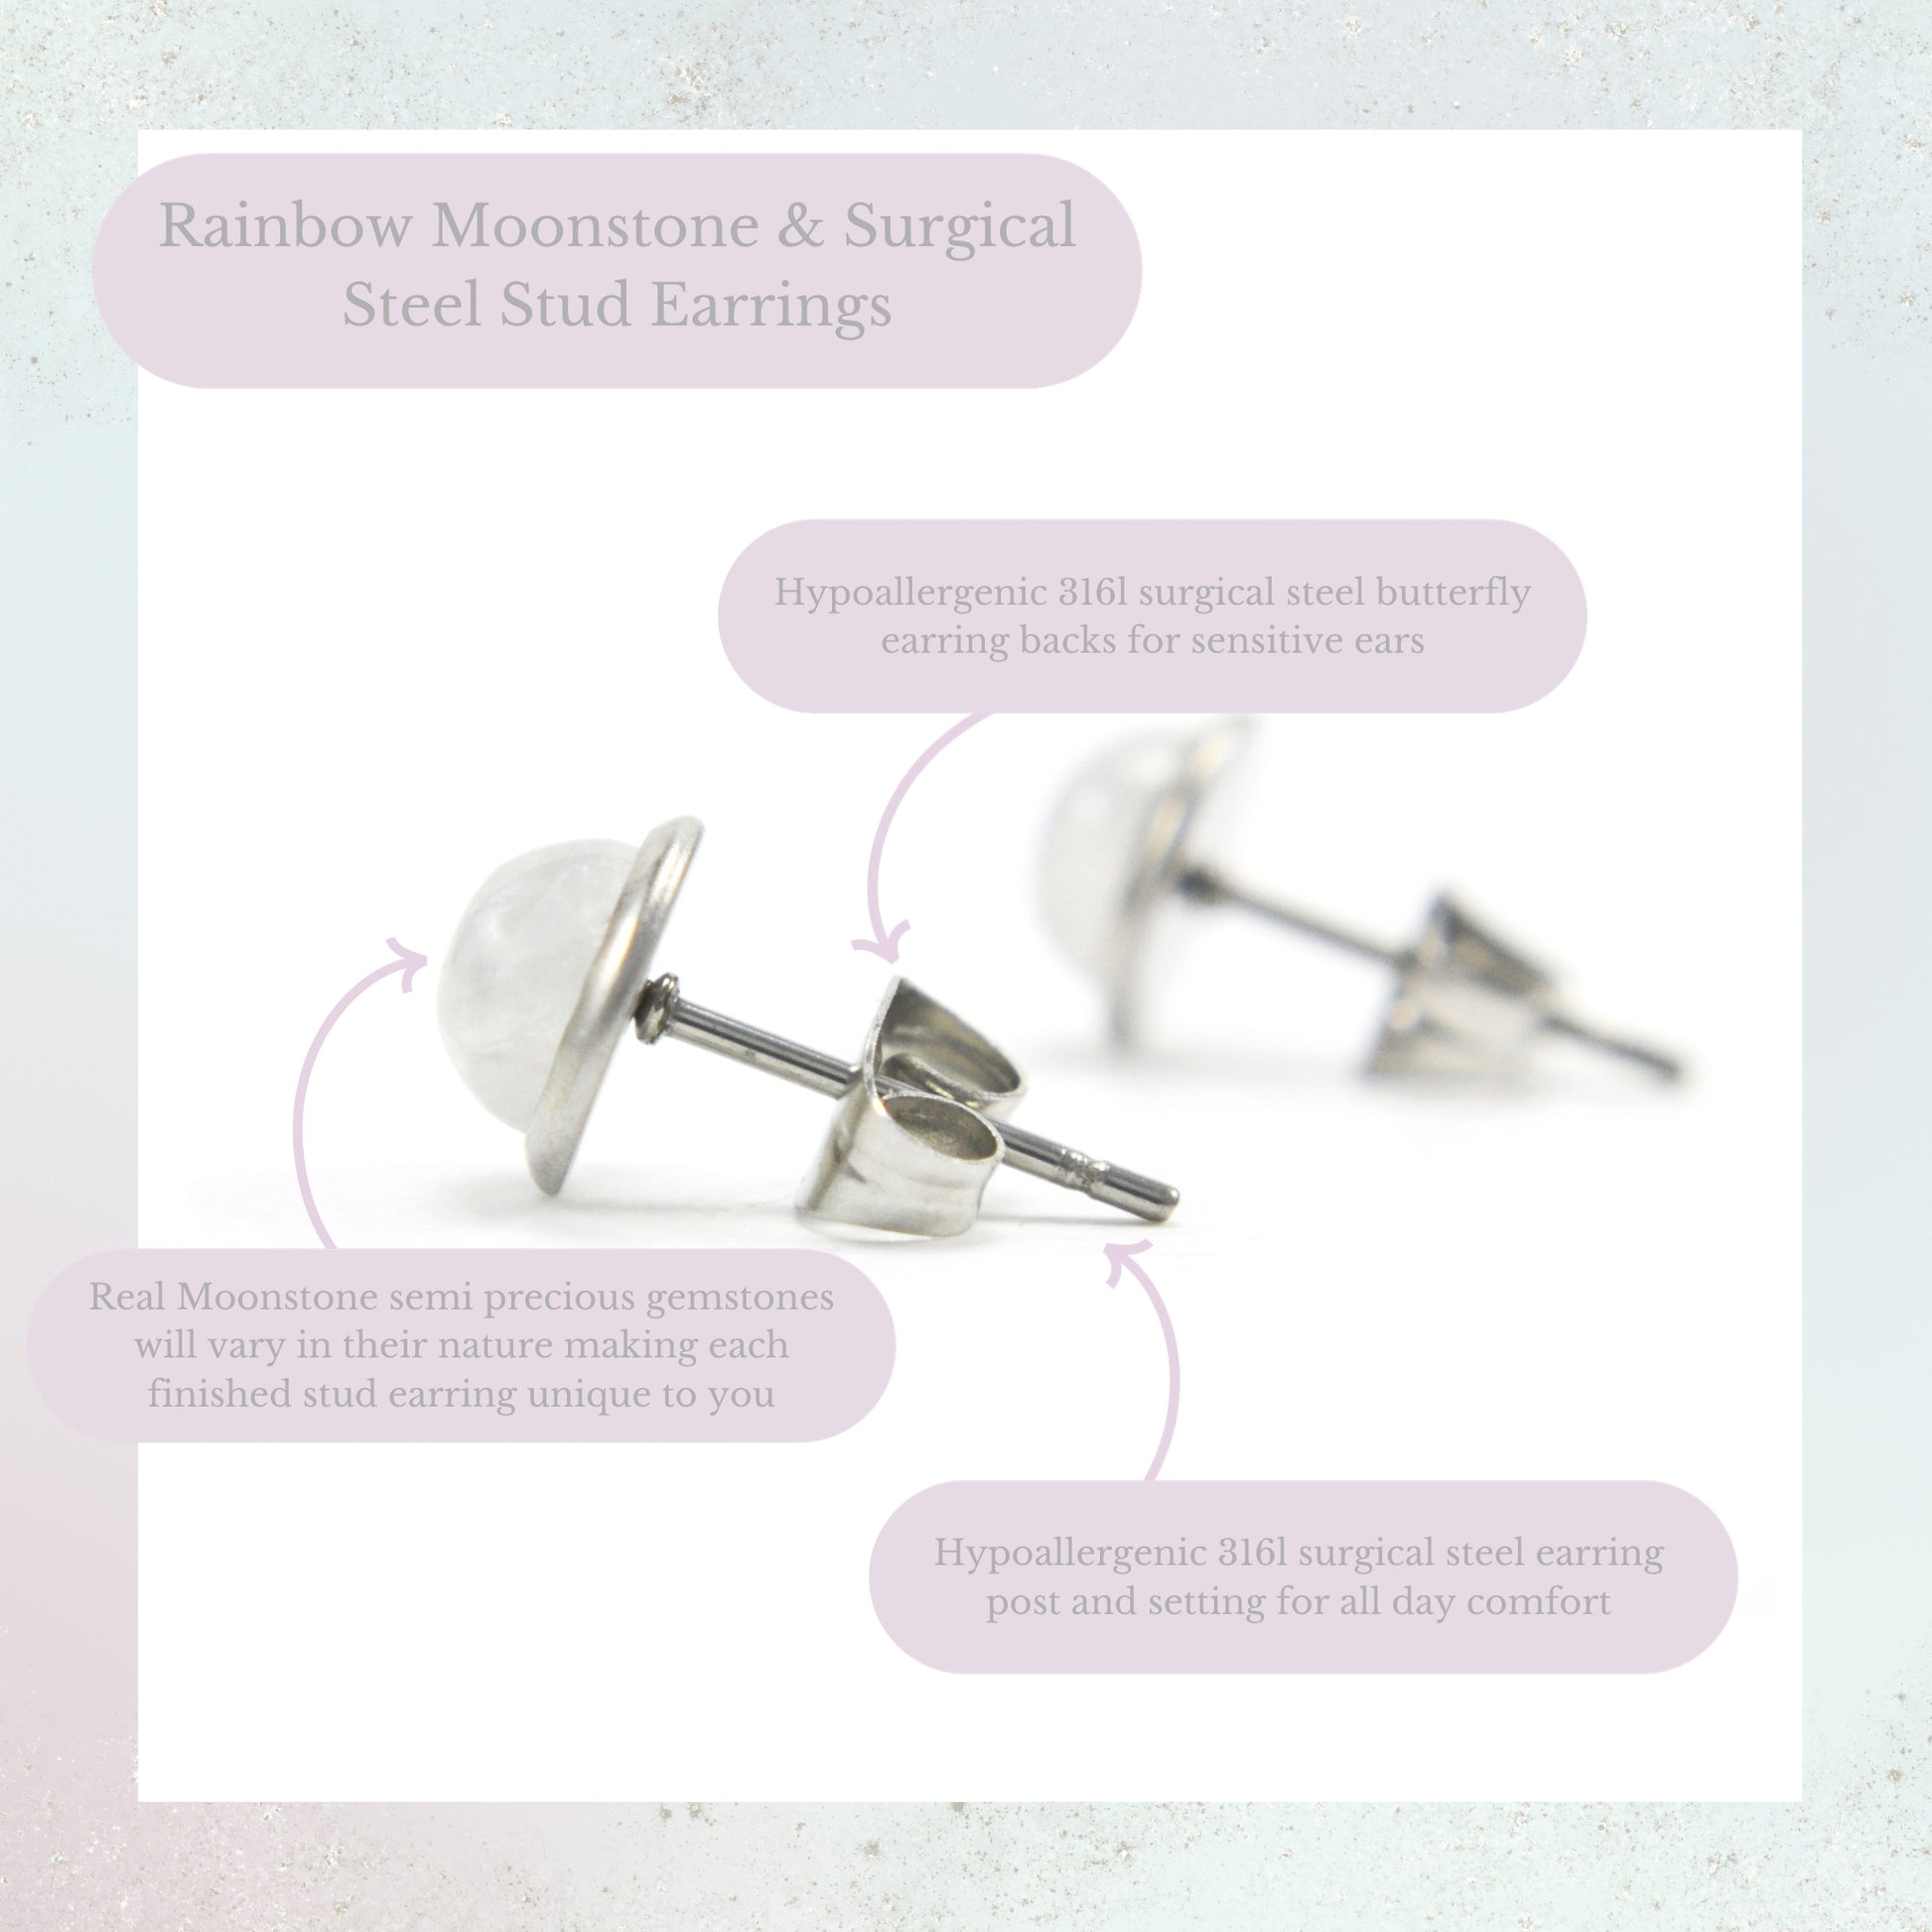 Rainbow Moonstone & Surgical Steel Stud Earrings Product Information Graphic